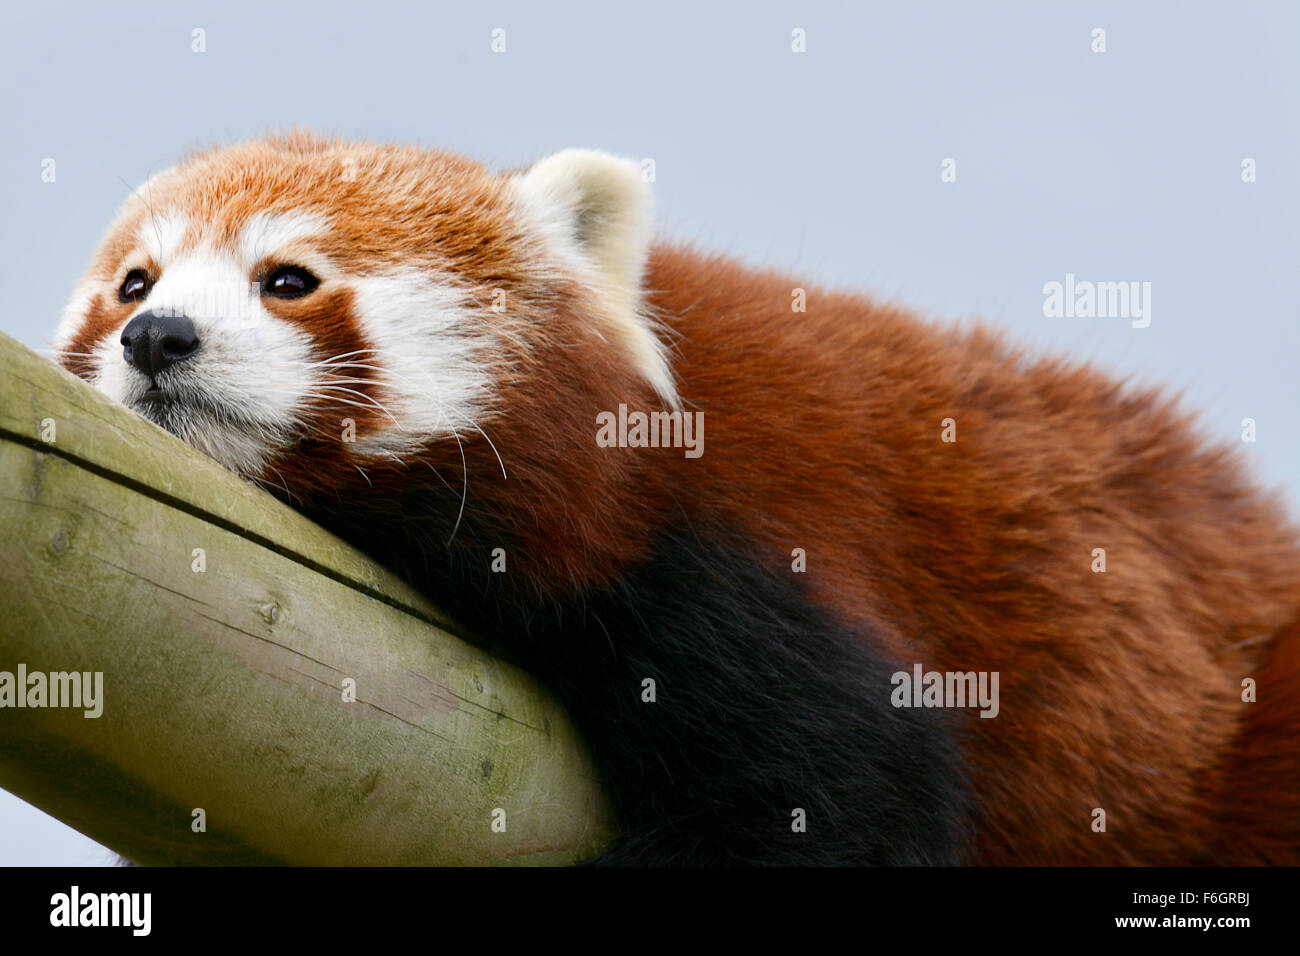 Close up image of a red panda looking bored Stock Photo